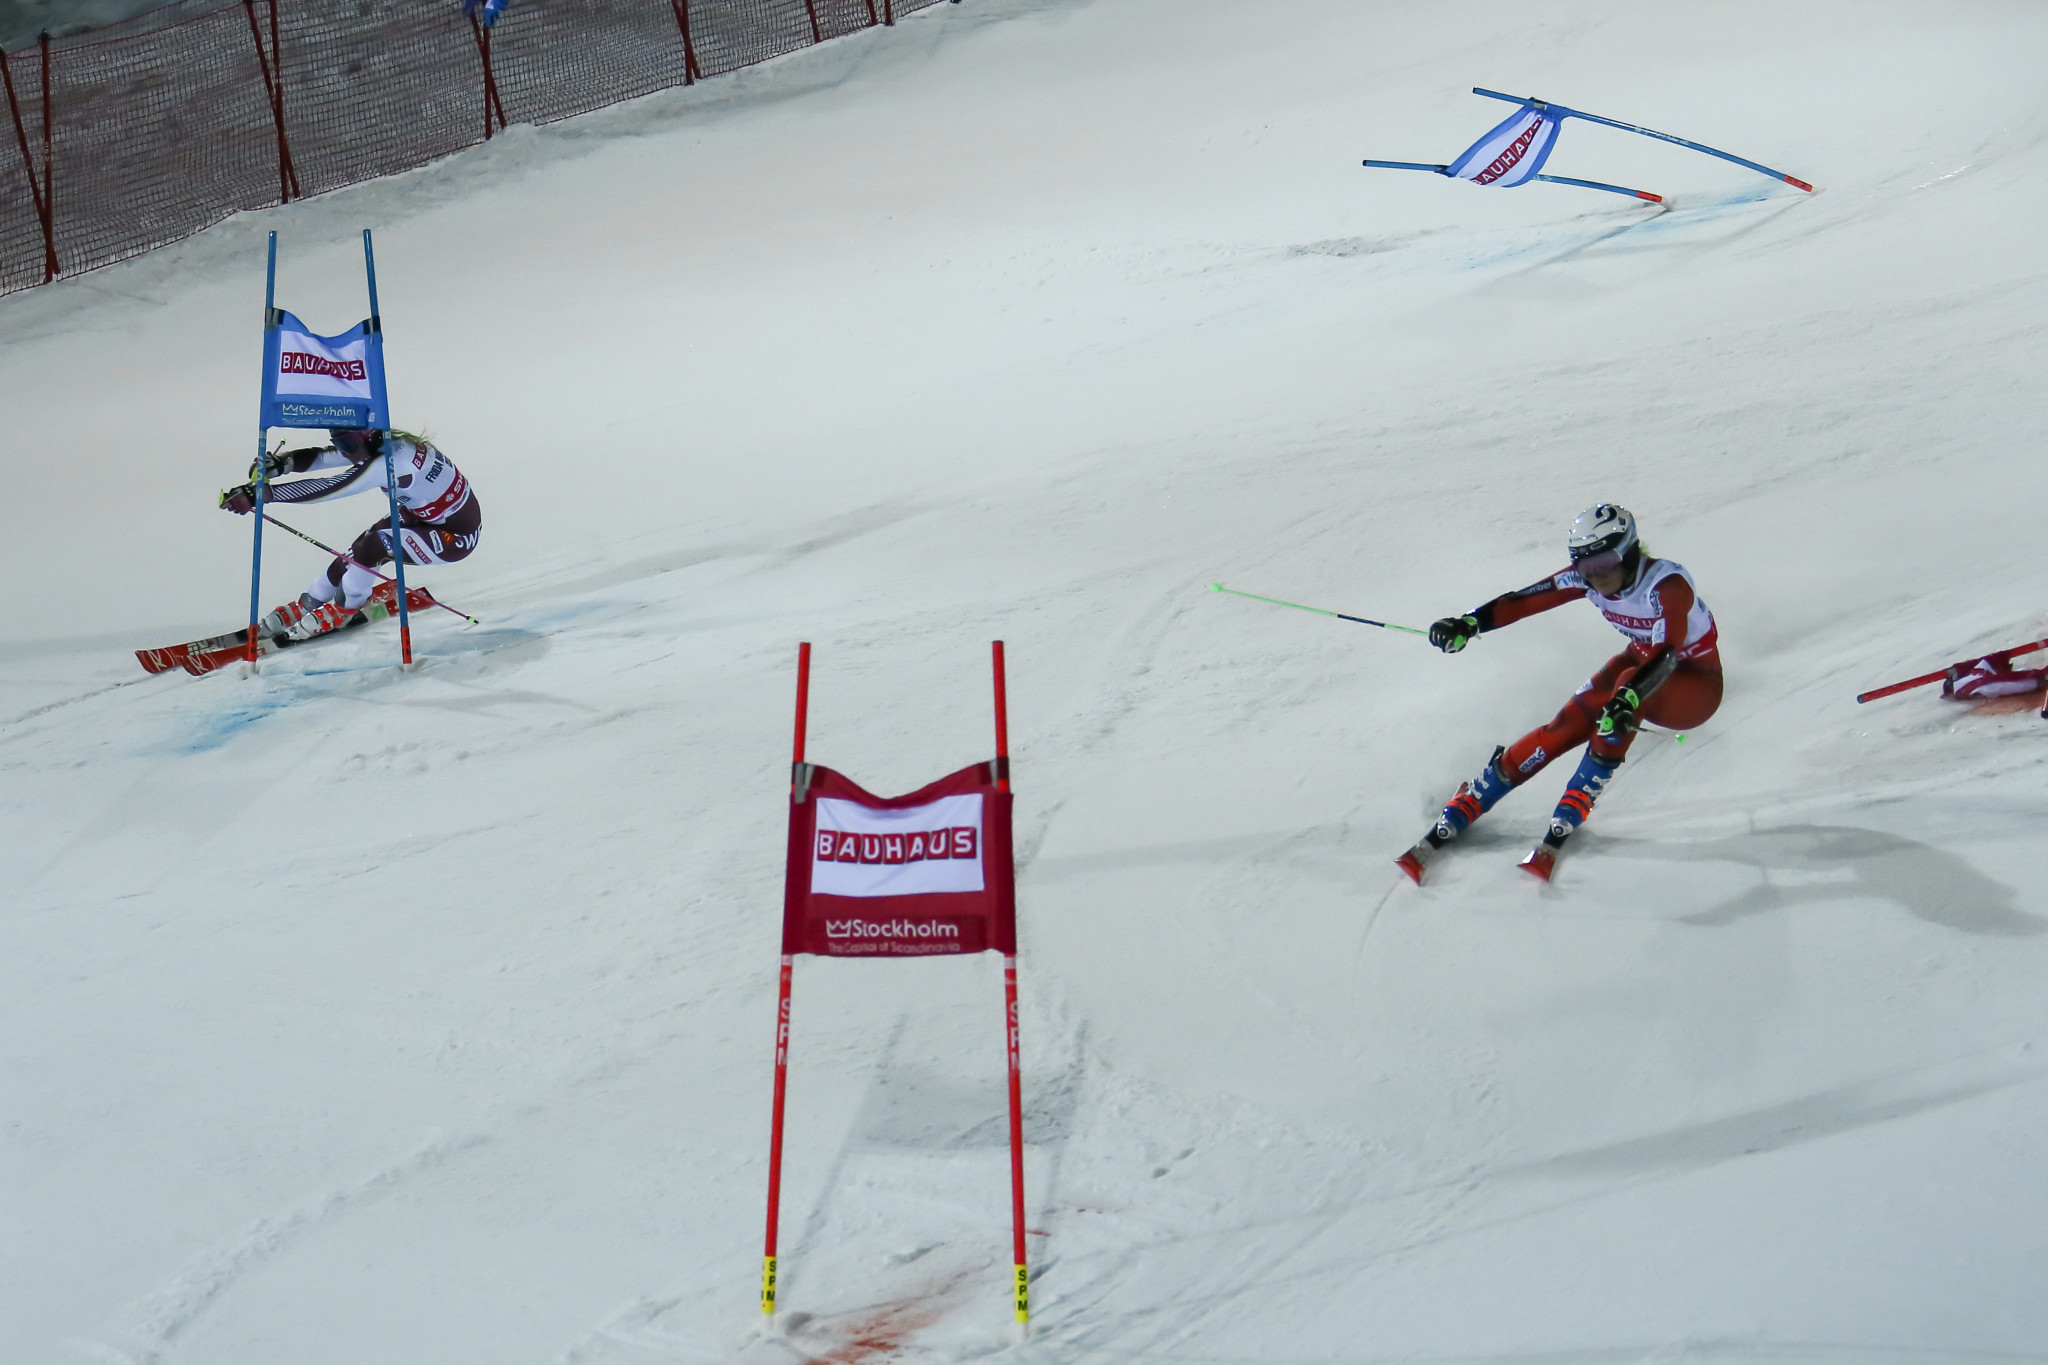 Stockholm to host parallel slalom competition as FIS Alpine Skiing World Cup resumes